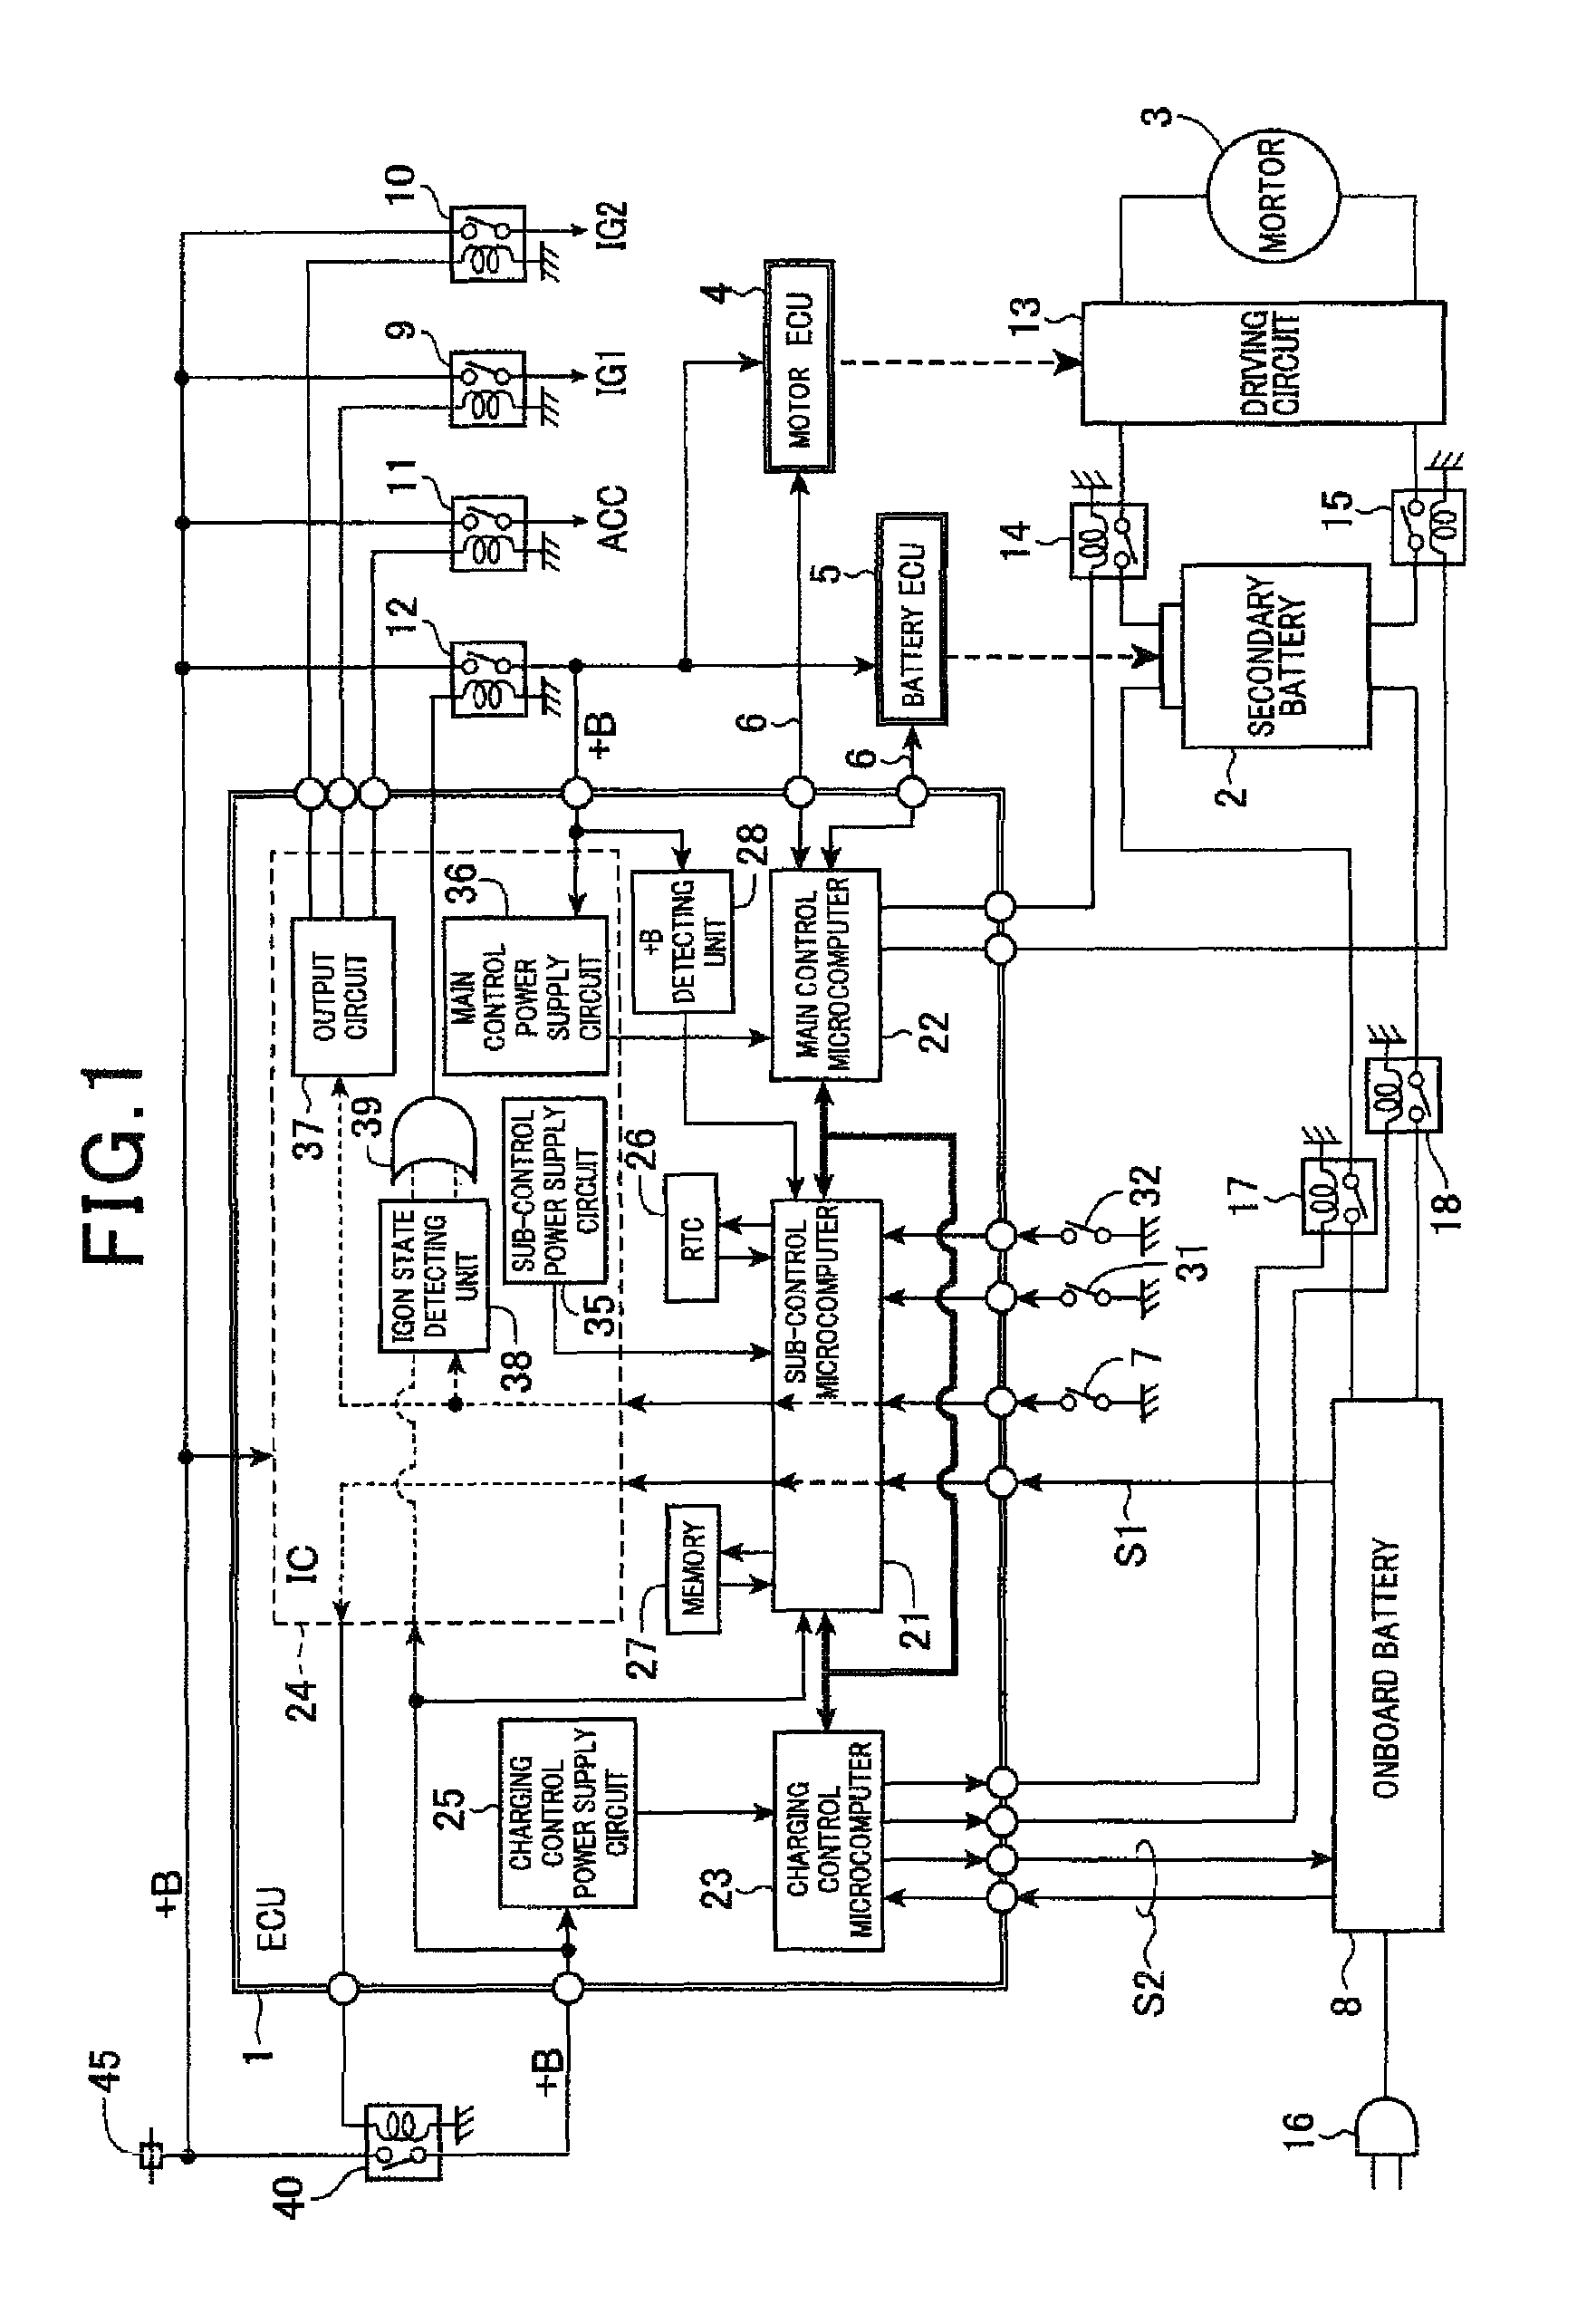 Onboard charging control apparatus for controlling charge to secondary battery